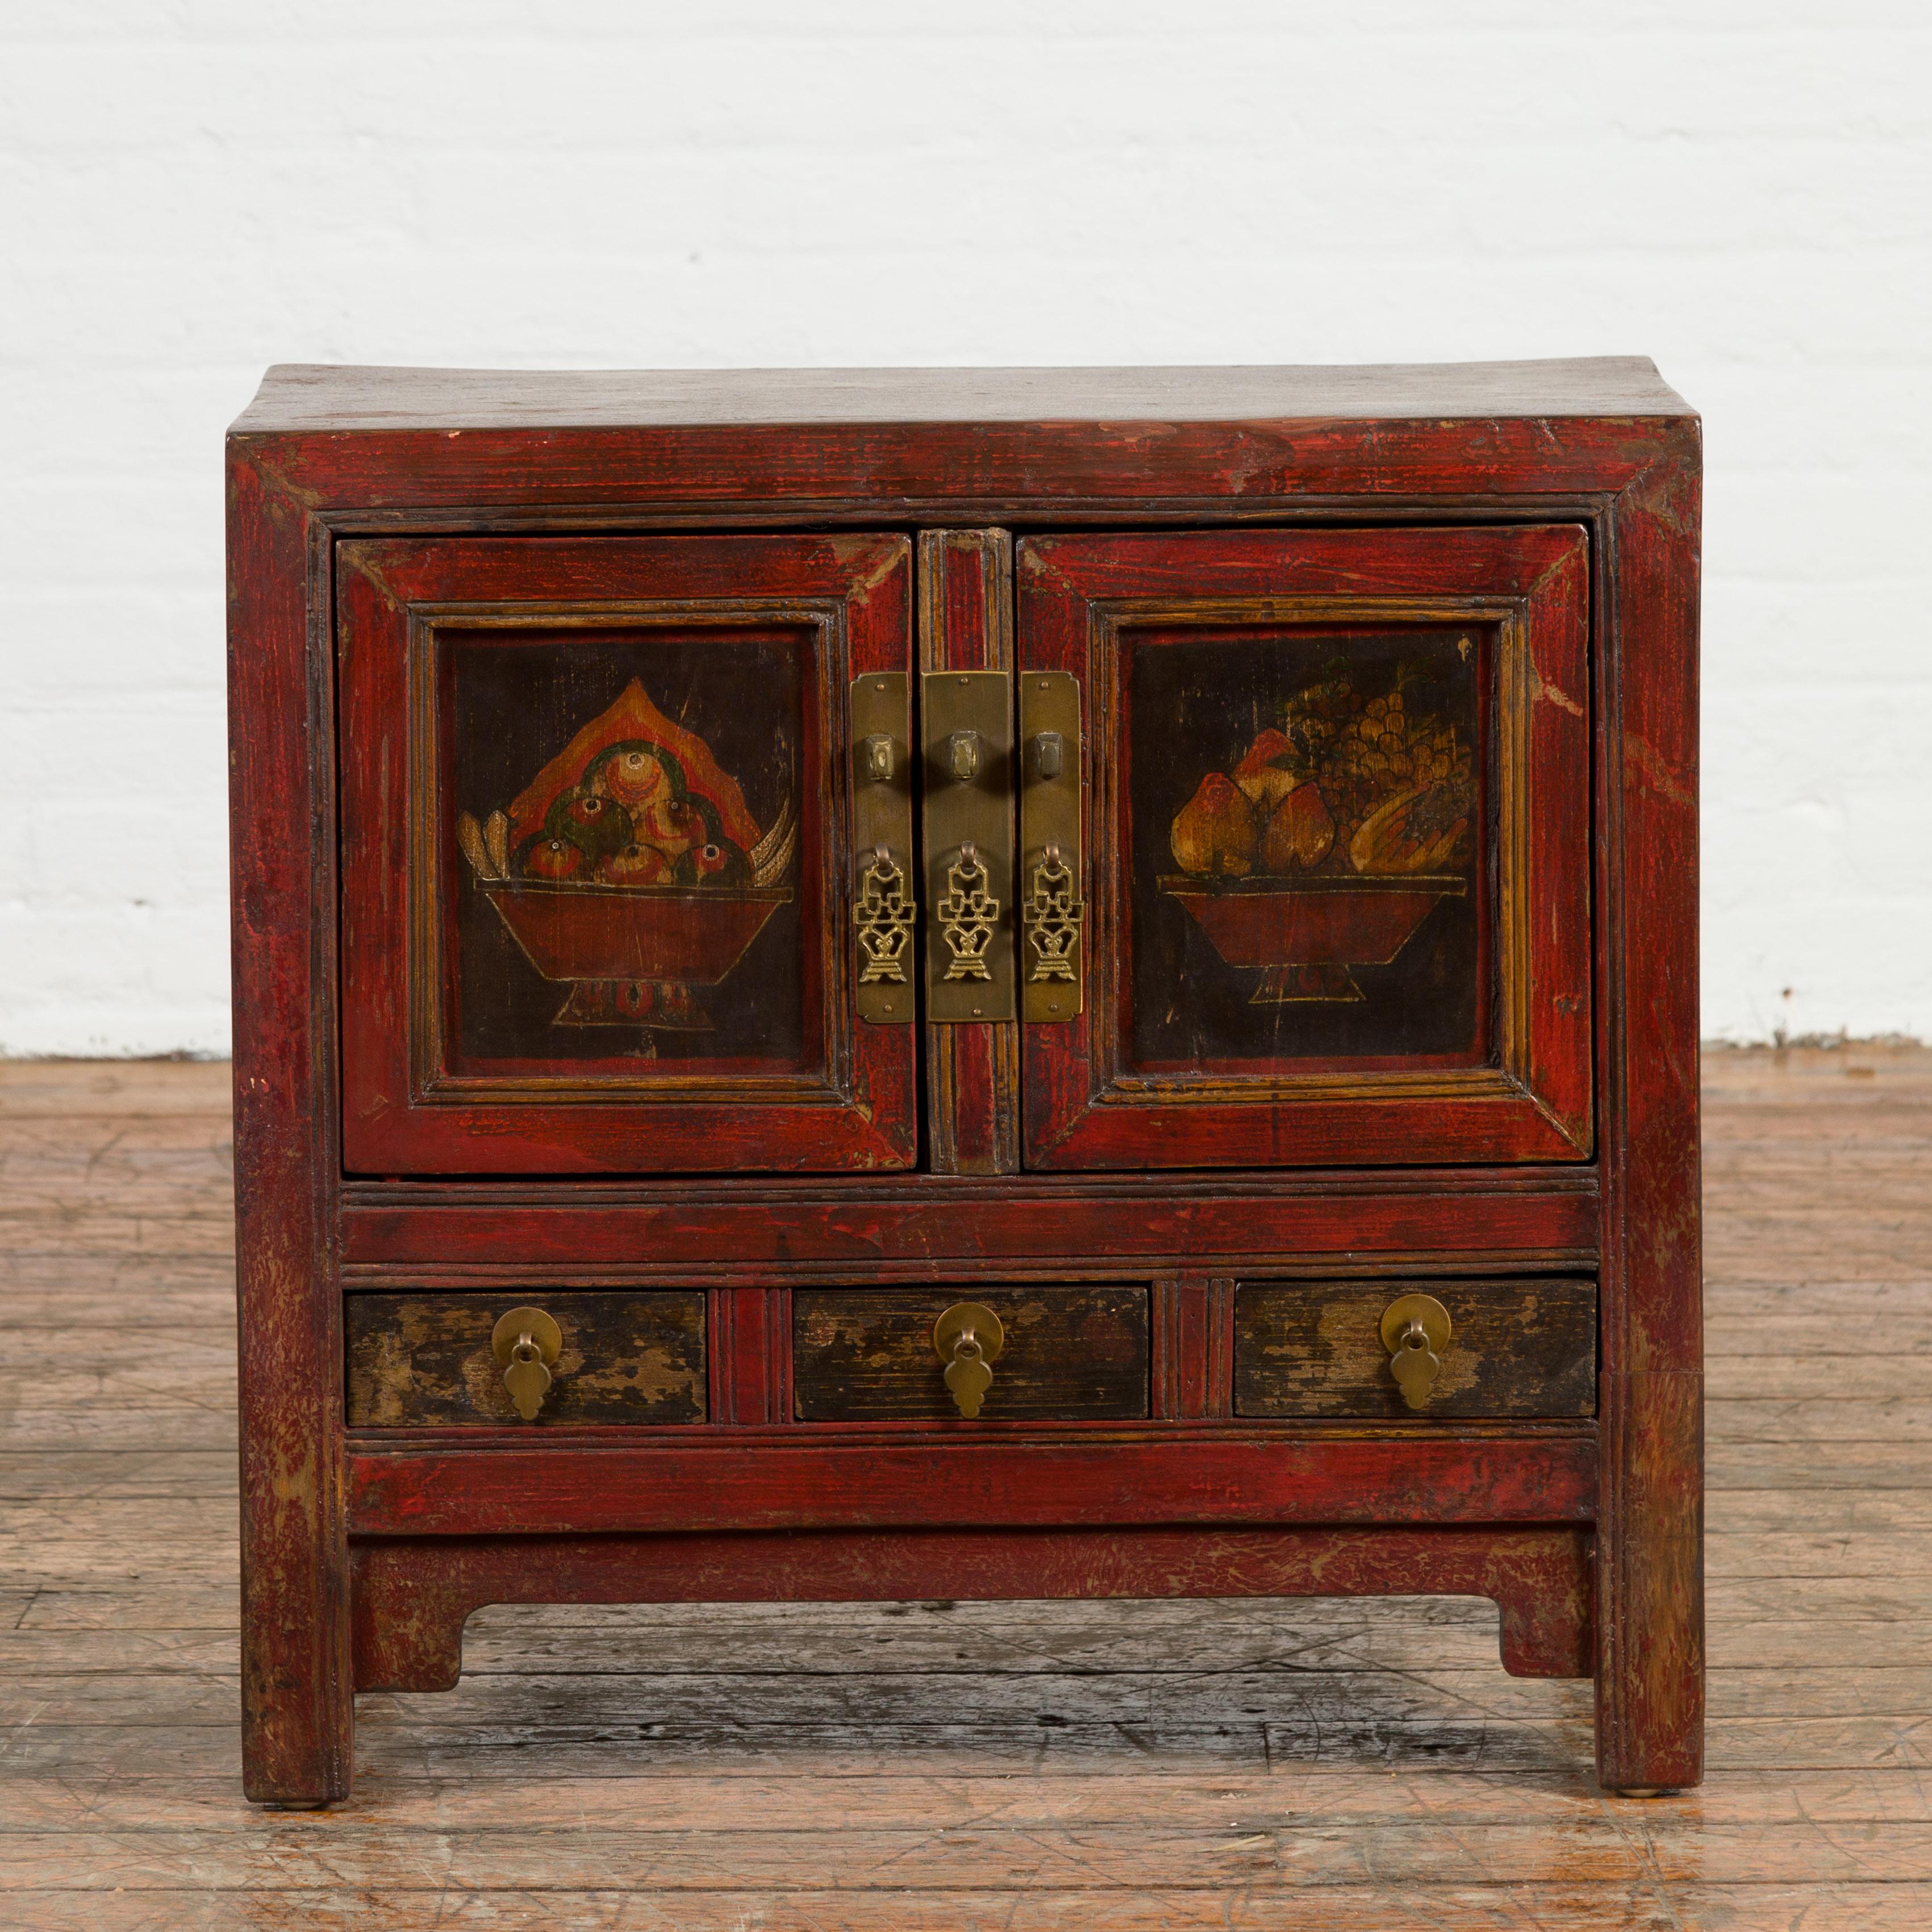 A Chinese Qing Dynasty period small red lacquer cabinet from the 19th century, with painted fruit baskets and brass hardware. Created in China during the Qing Dynasty, this small cabinet features a rectangular top sitting above two doors and three